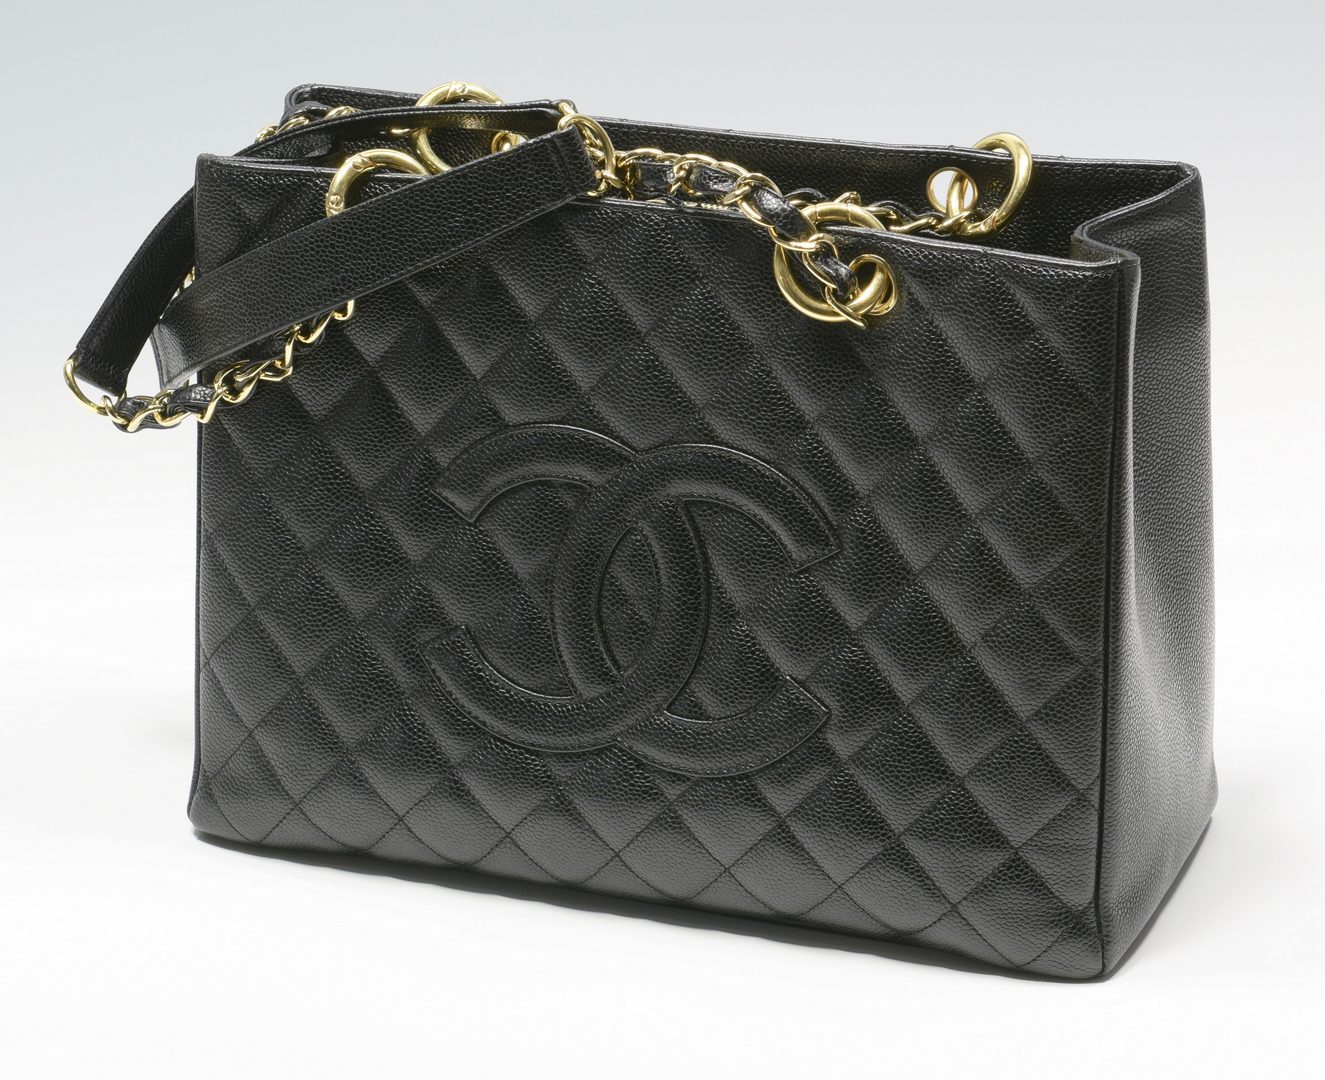 Lot 920: Black Chanel Grand Shopping Tote with Gold